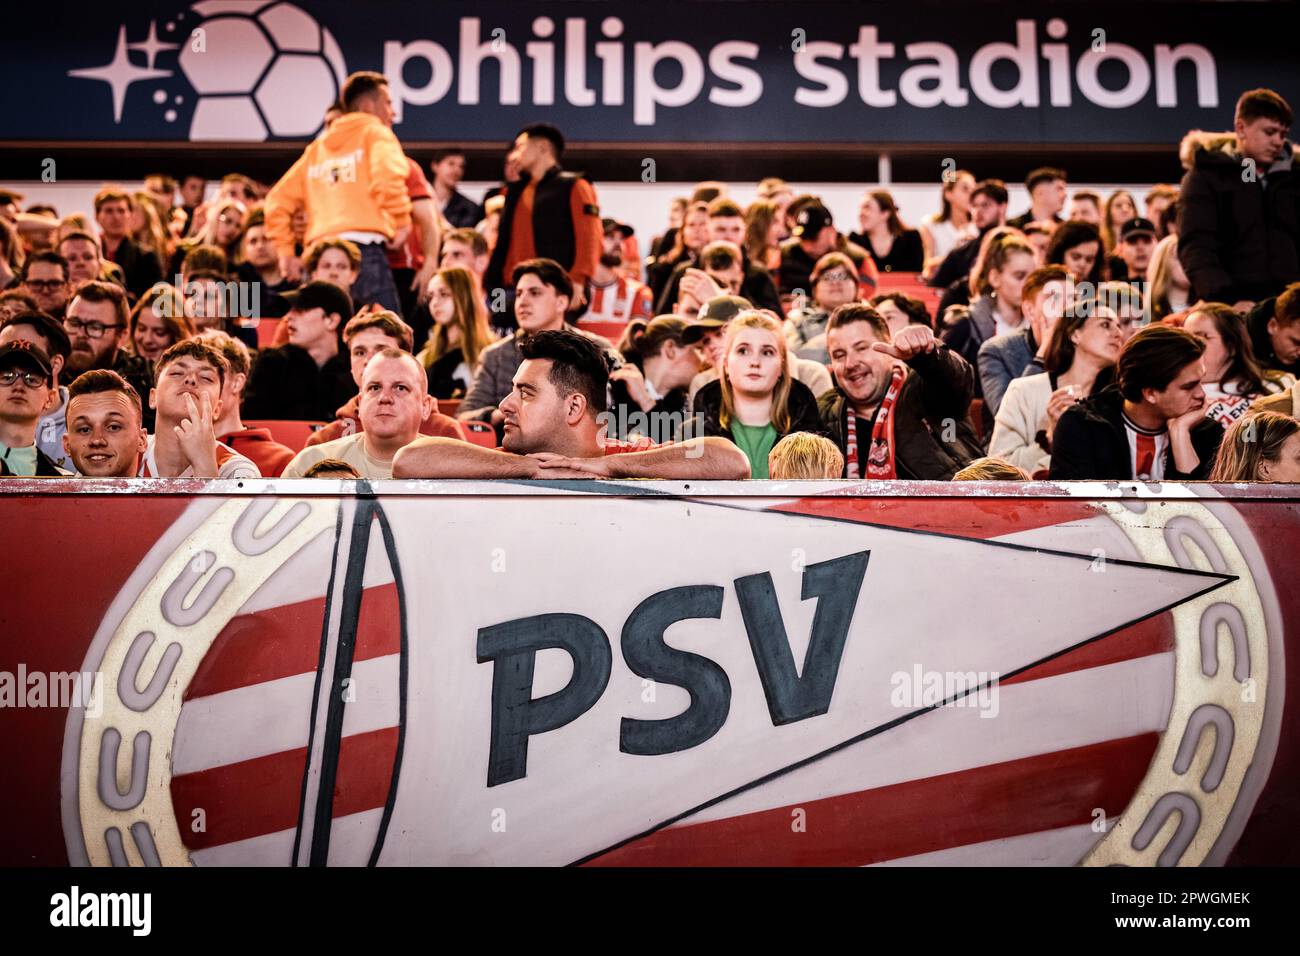 EINDHOVEN - Fans in the Philips Stadium prior to the PSV ceremony. The football club from Eindhoven has the KNVB Cup back in its hands thanks to a victory over Ajax. The team of coach Ruud van Nistelrooij defeated Ajax in the final in De Kuip on penalties. ANP ROB ENGELAAR netherlands out - belgium out Stock Photo